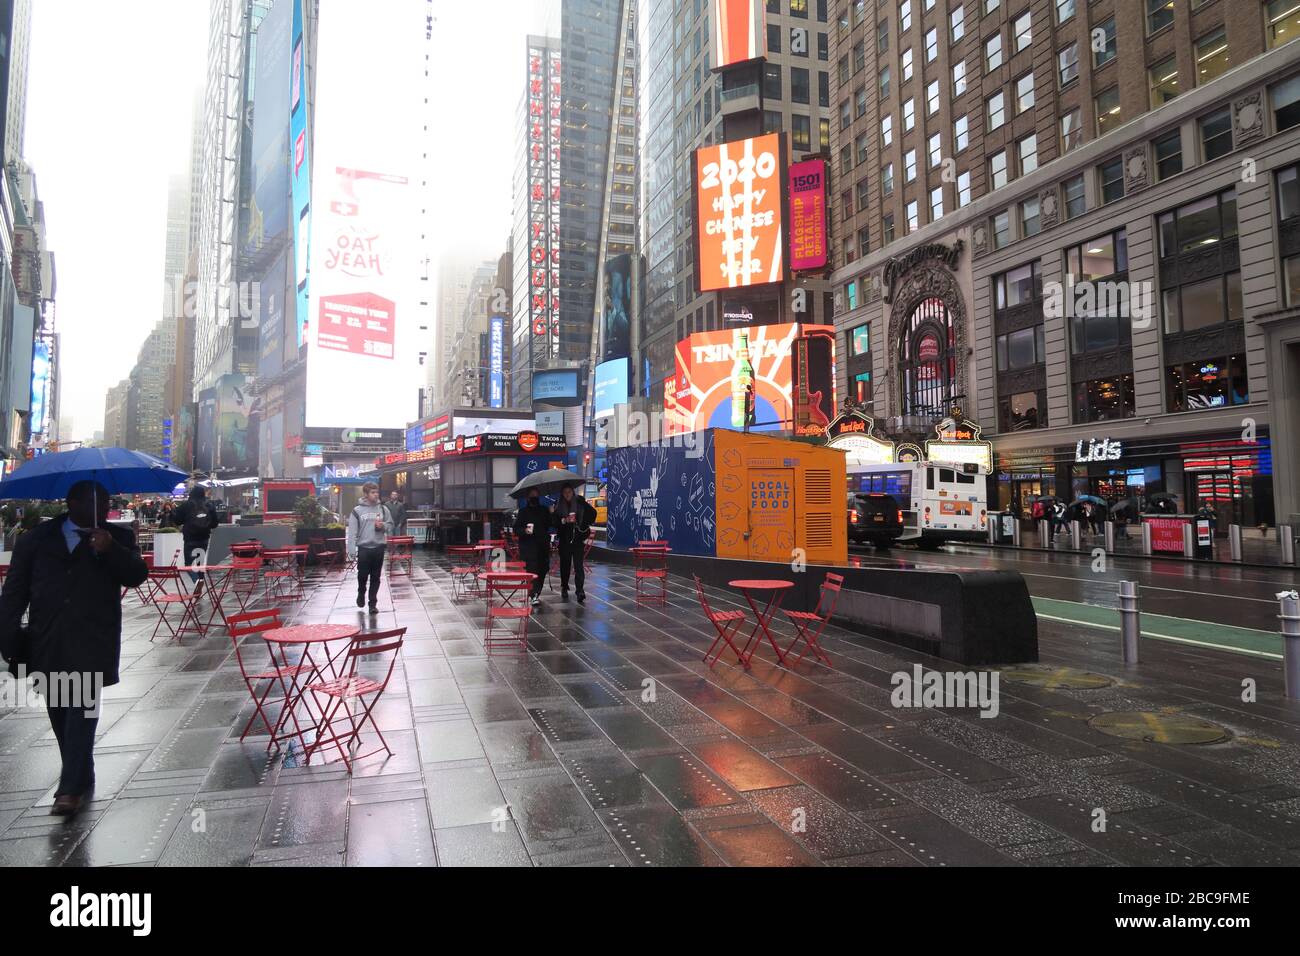 People walking with umbrellas, Times Square, New York City Stock Photo